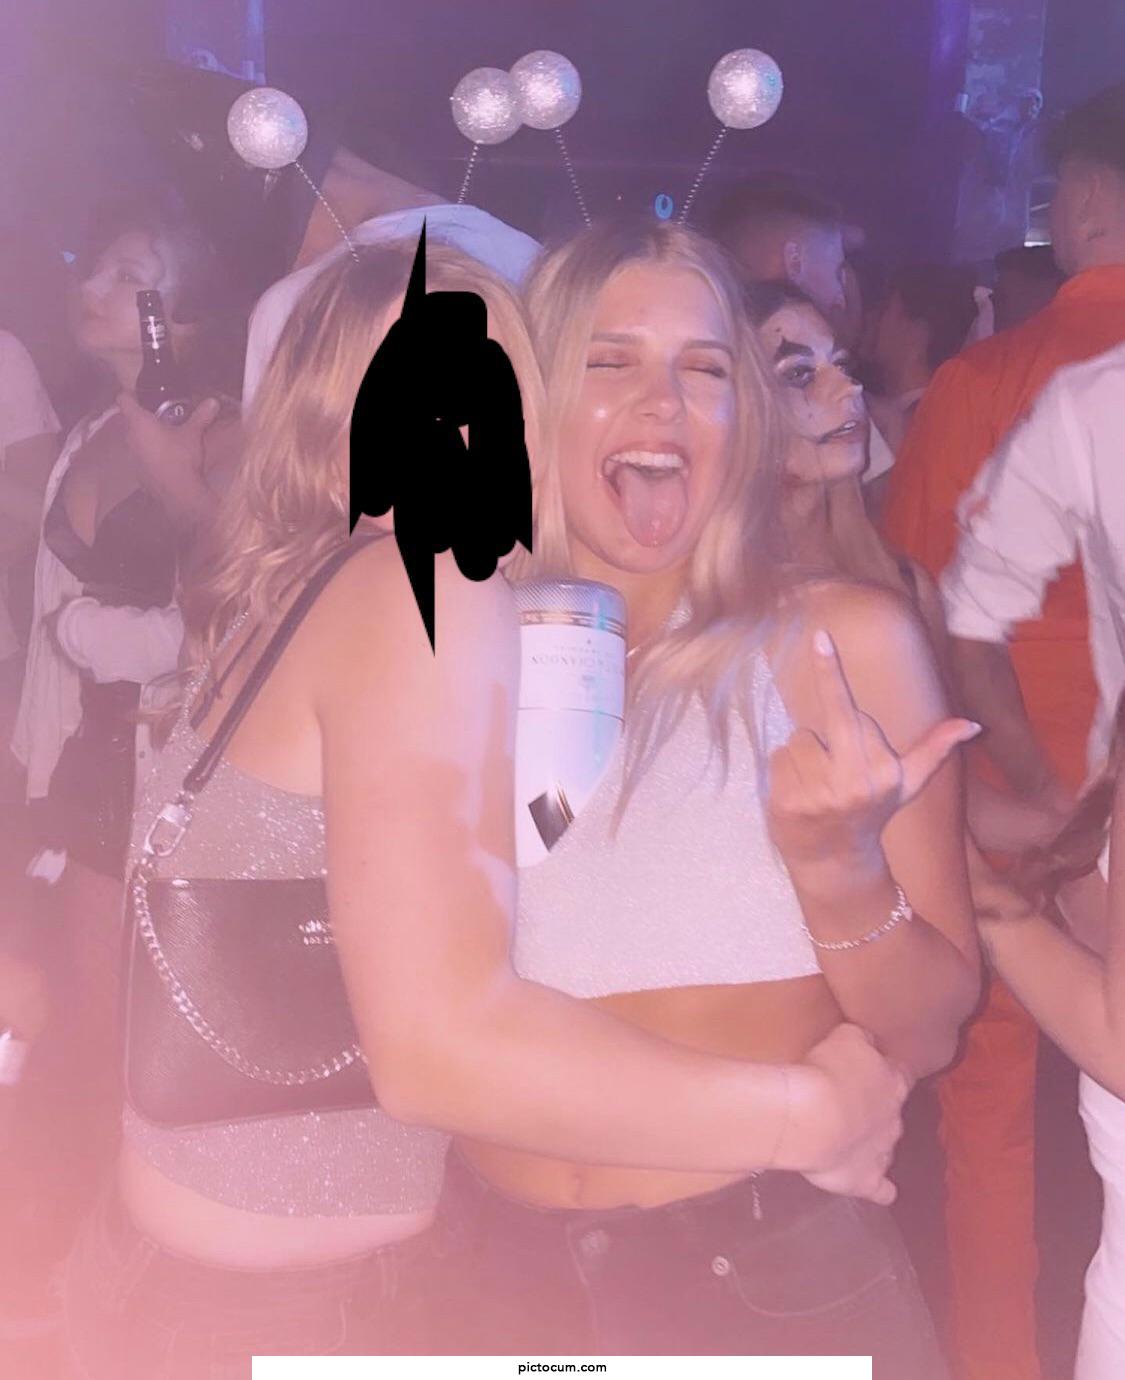 My gf loves to party